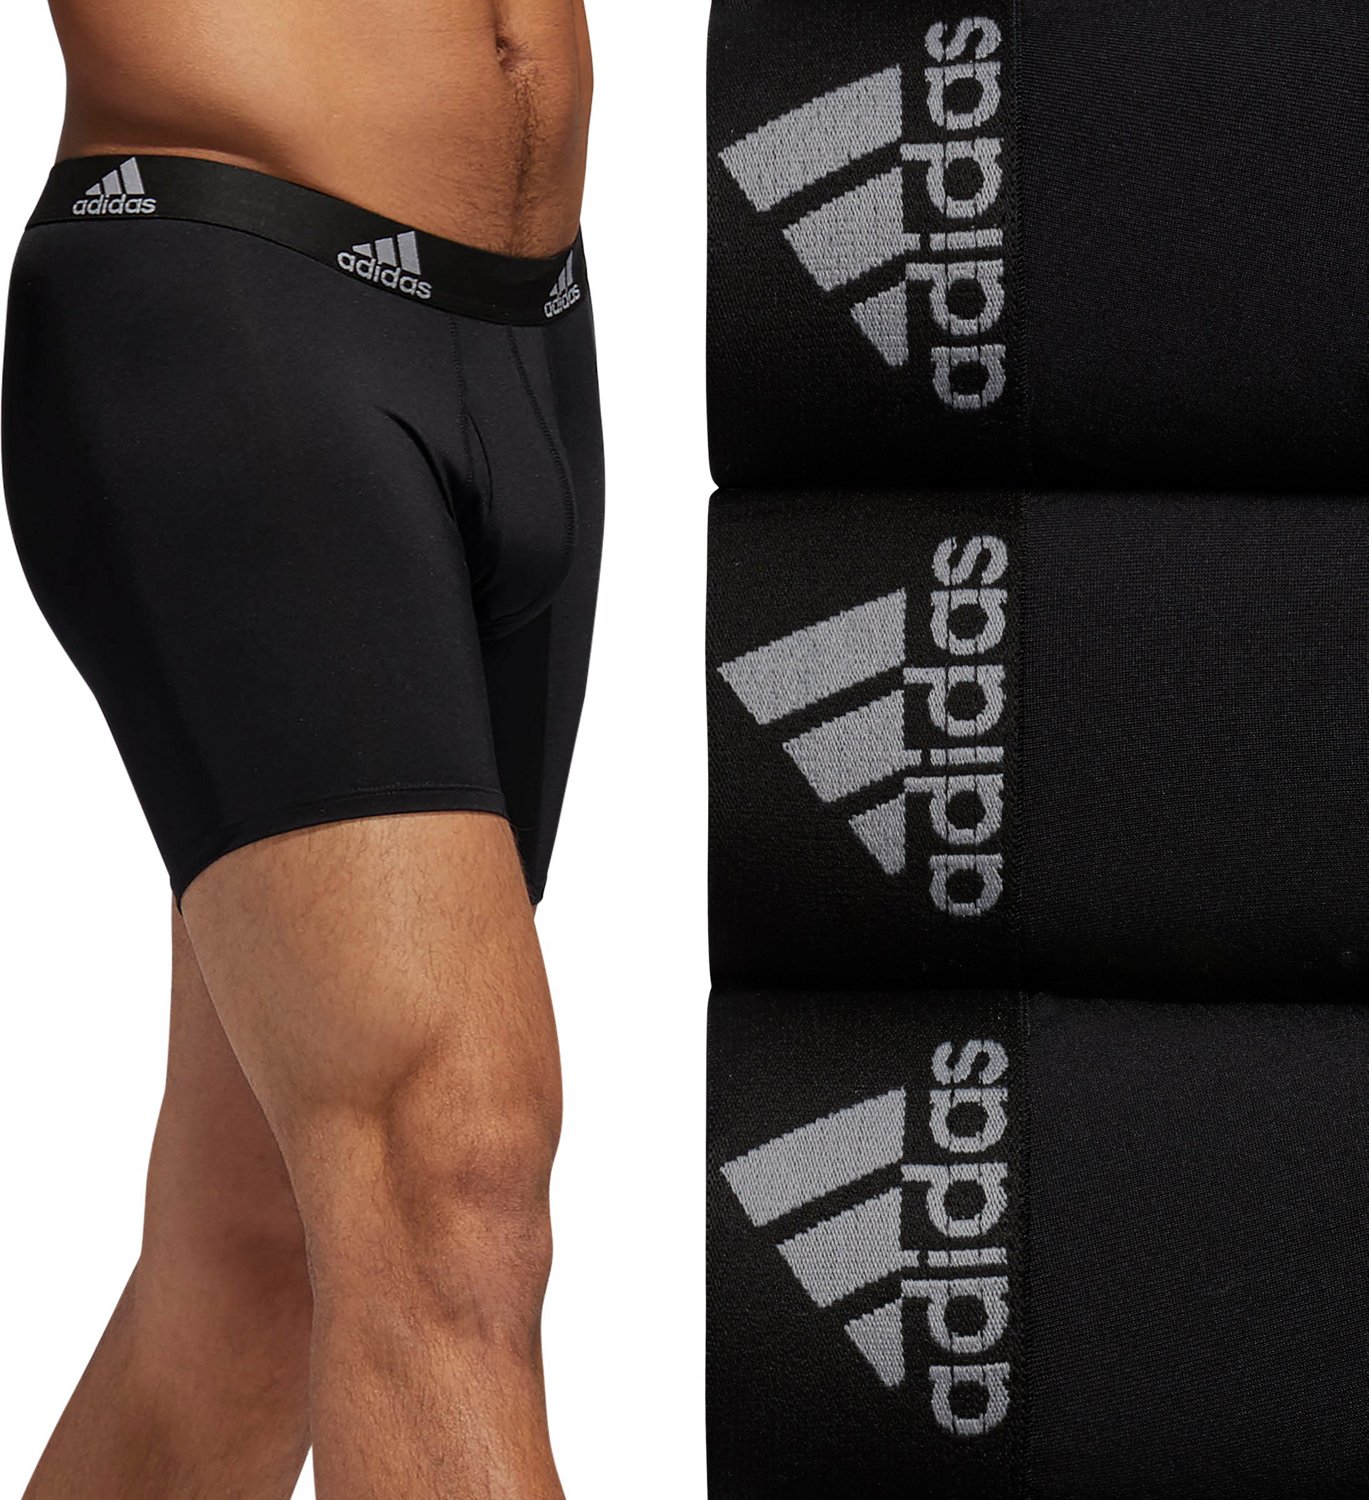 Adidas Relaxed Performance Boxer Brief 3 Pack 